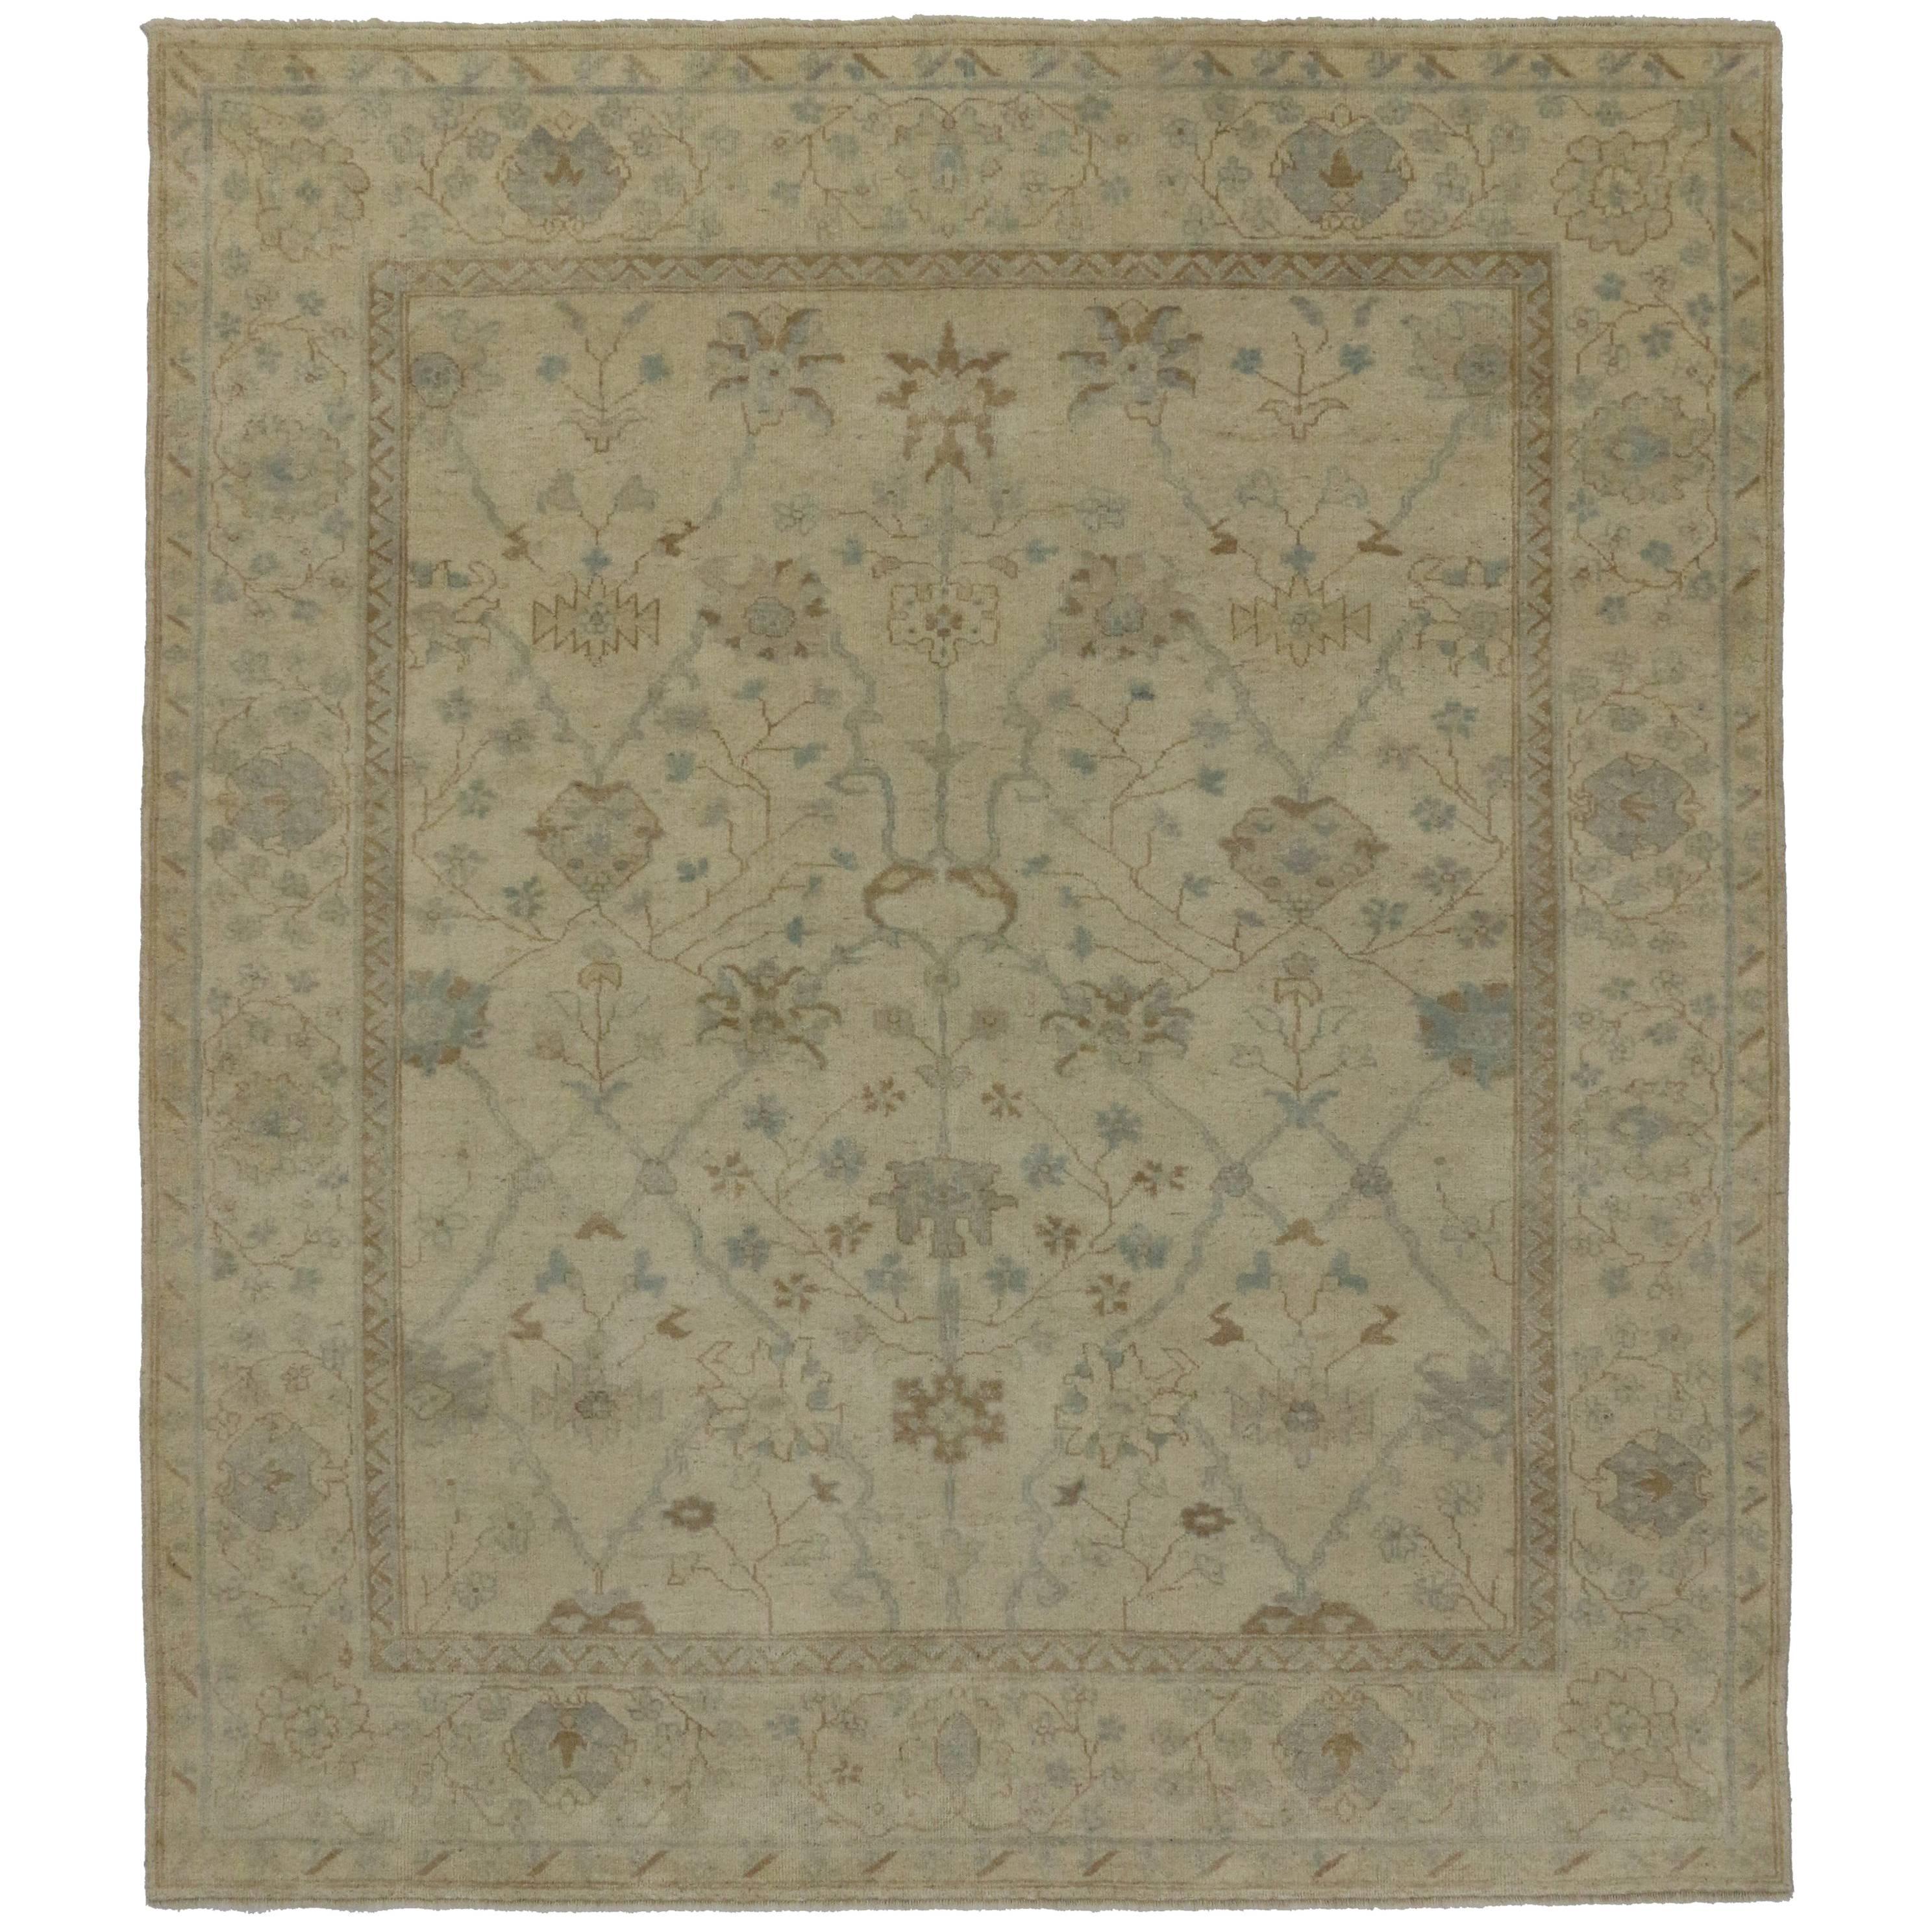 New Contemporary Oushak Area Rug with Coastal Cottage Style For Sale